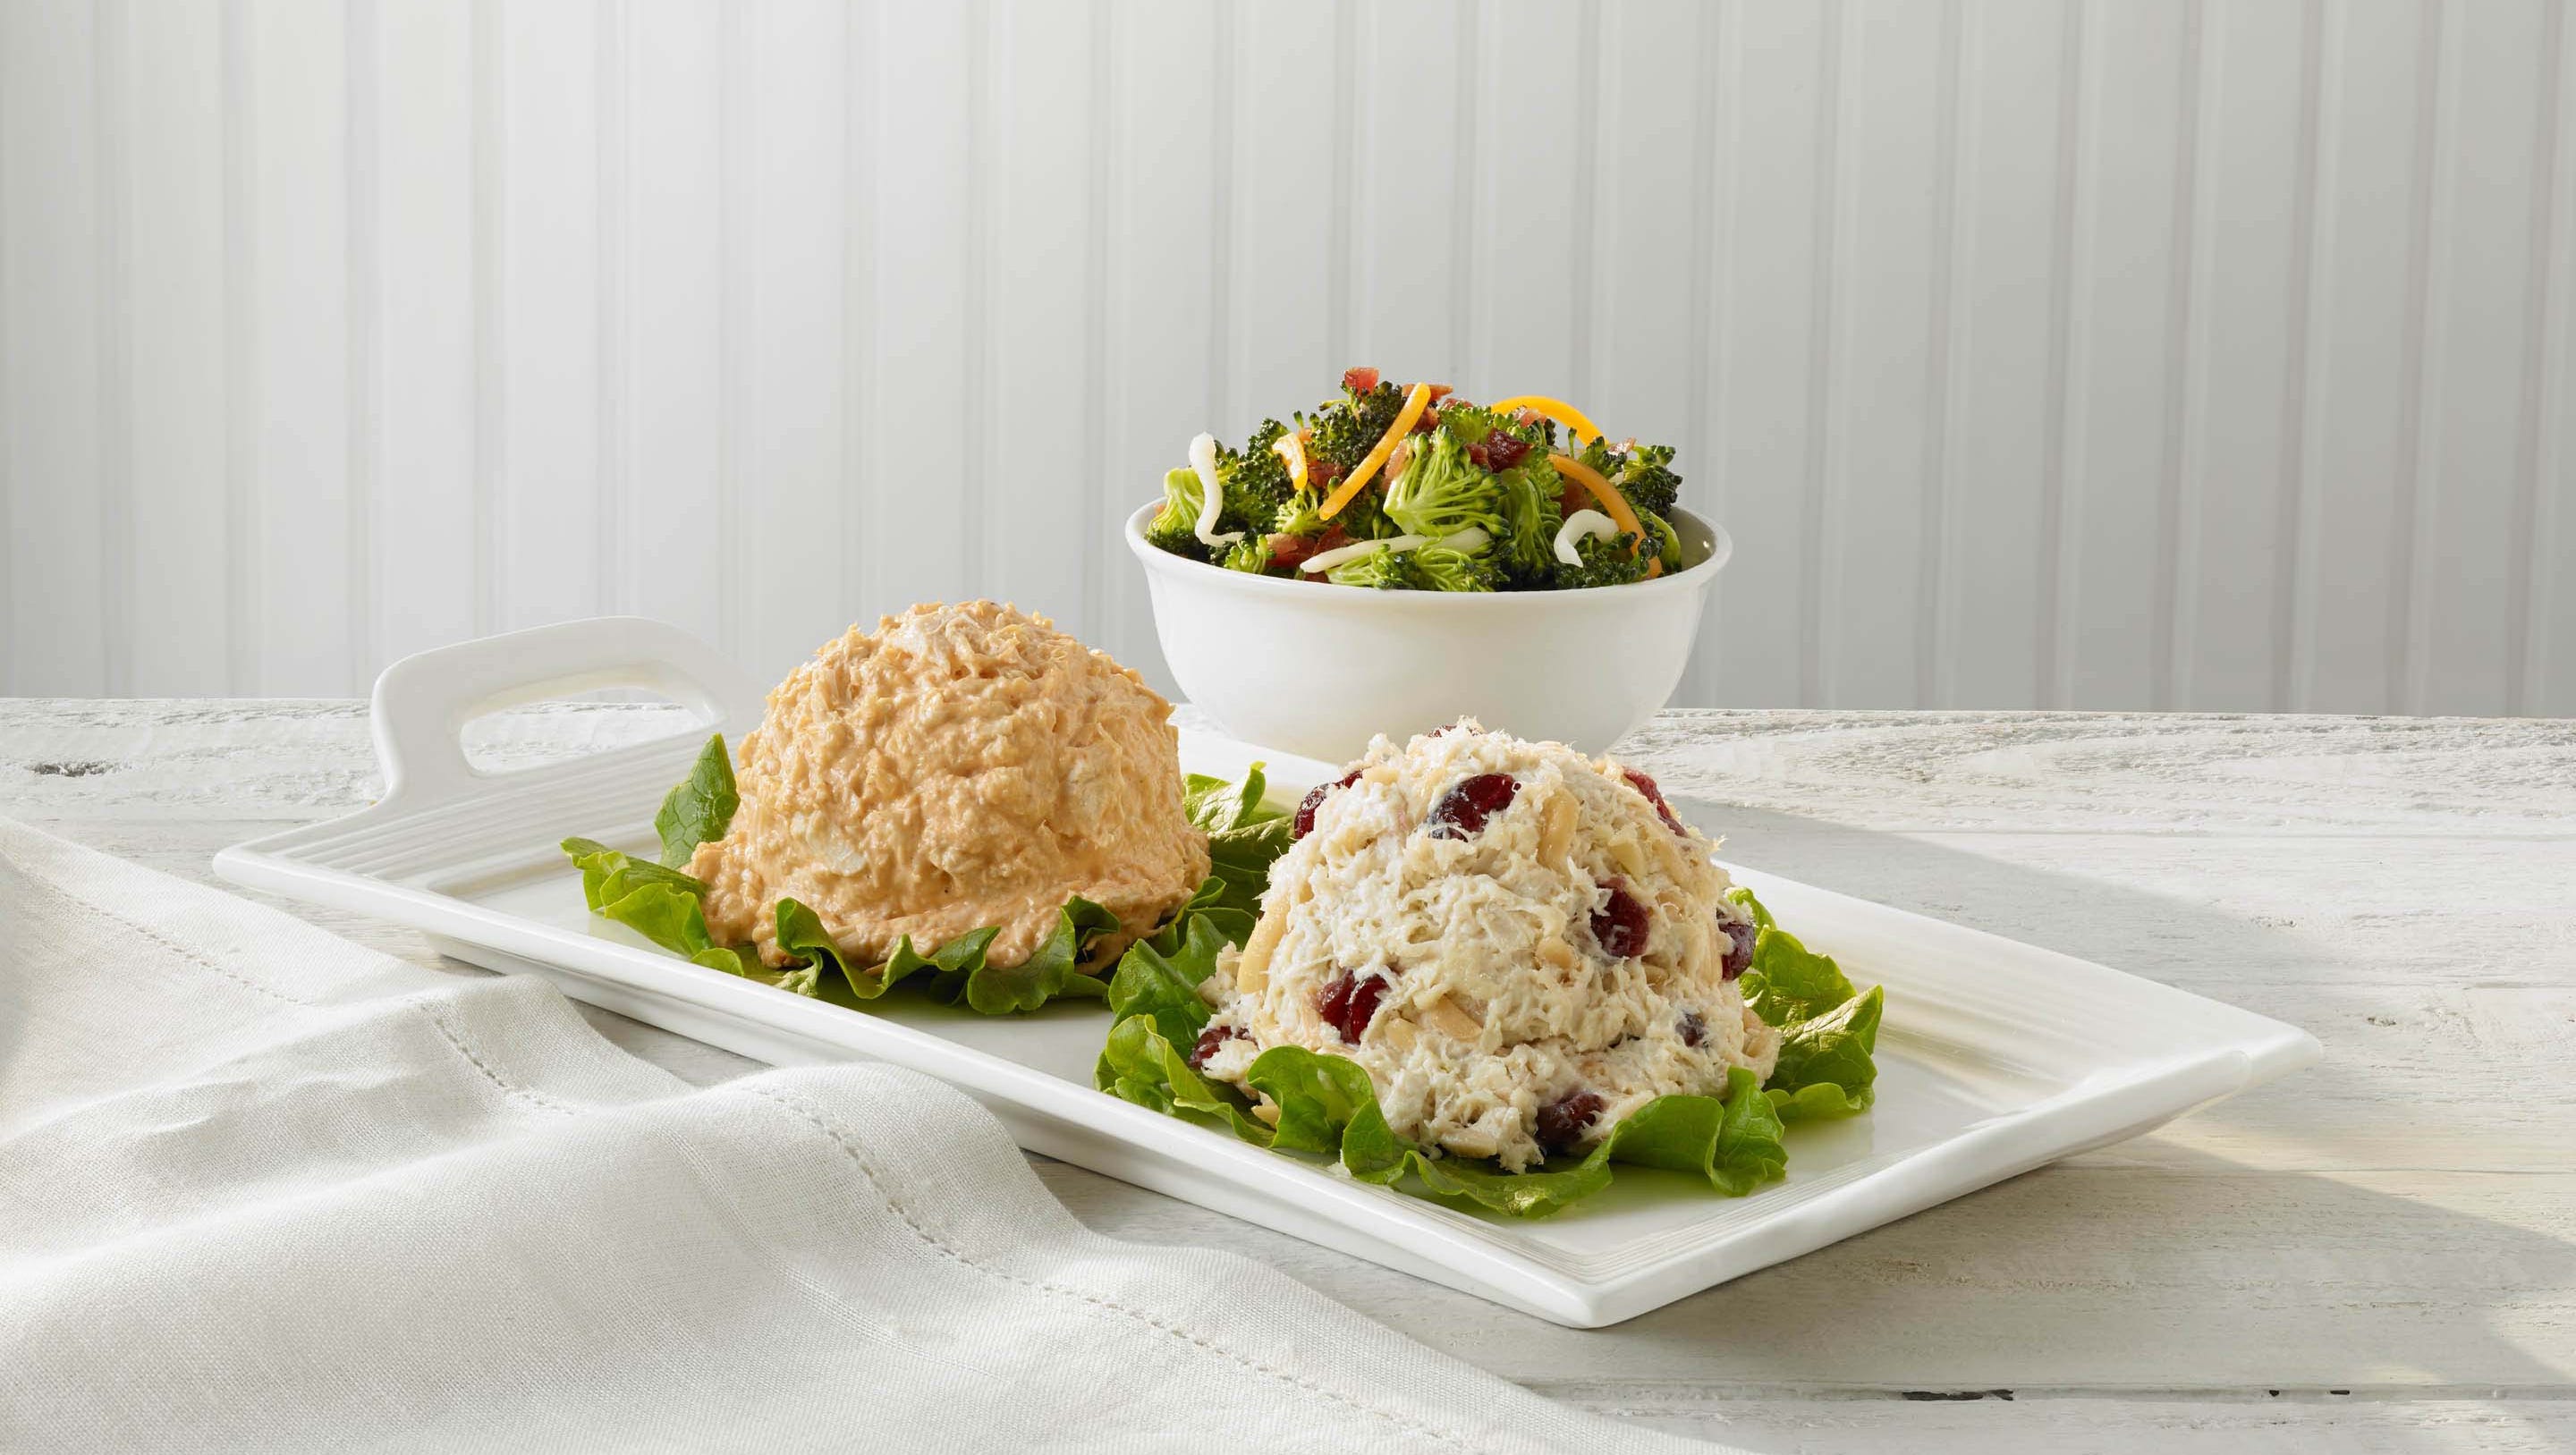 Chain restaurant Chicken Salad Chick plans grand opening in Columbia on April 26